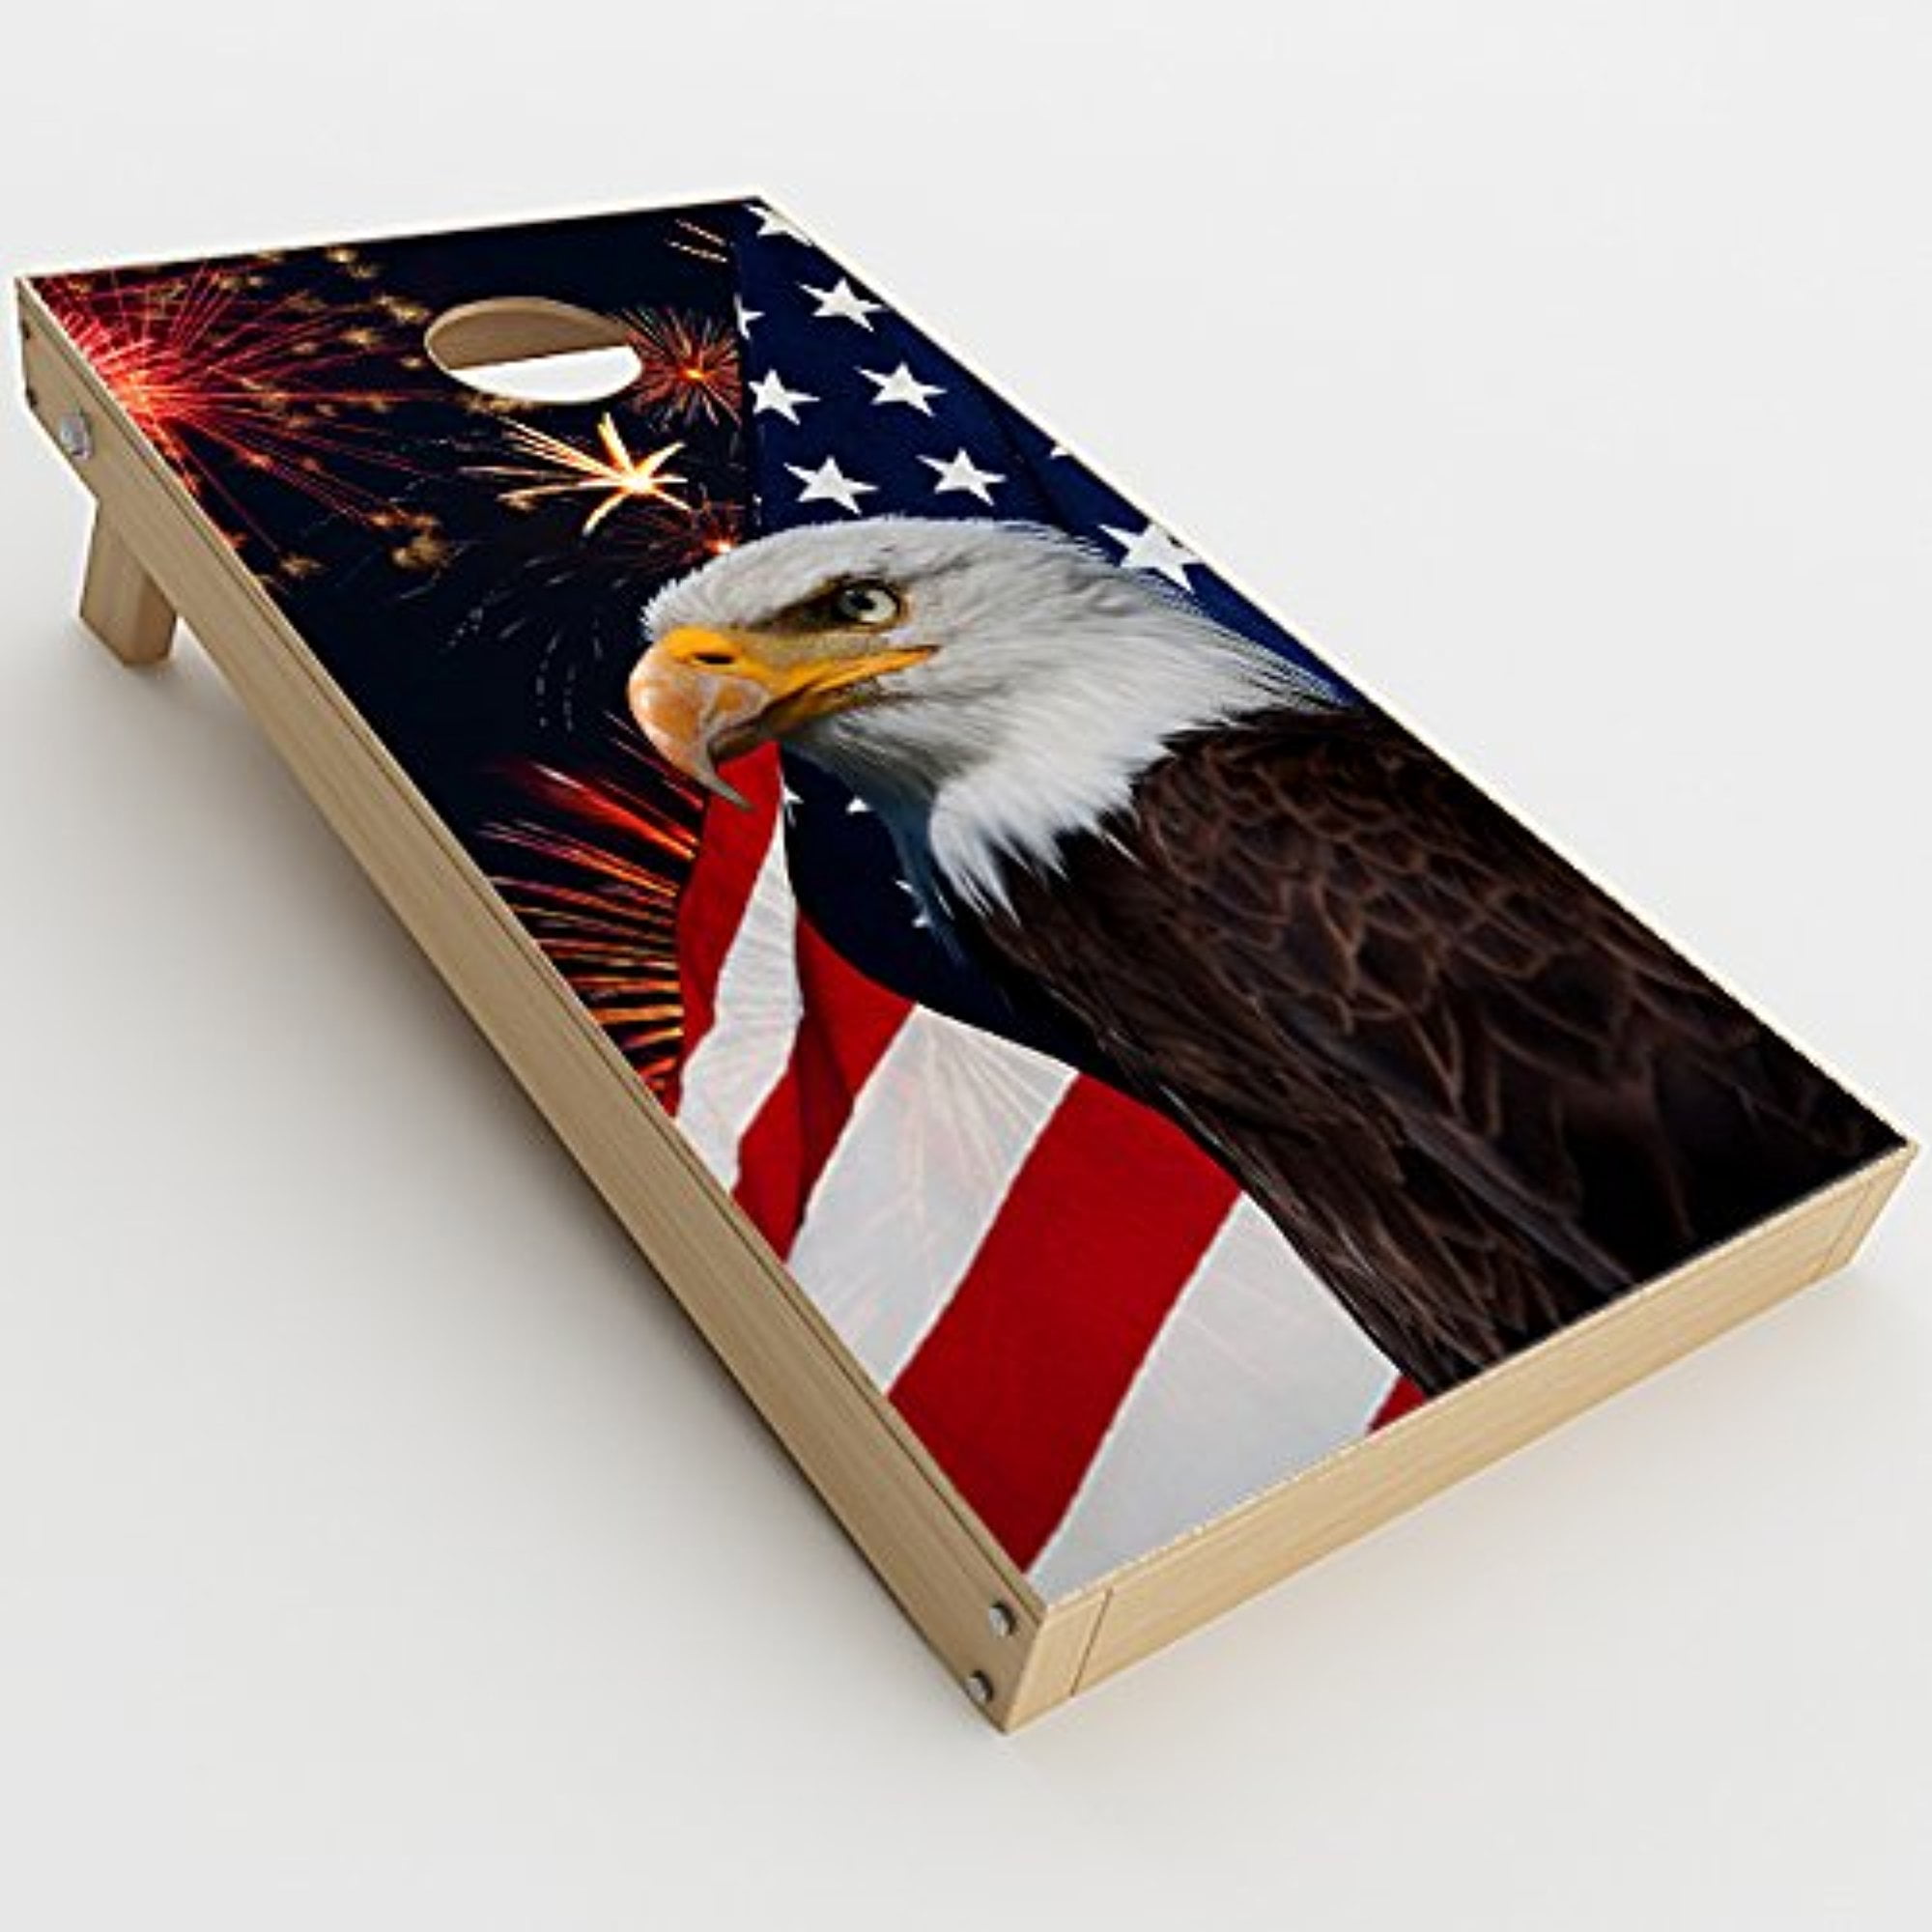 Skin Decal Vinyl Wrap for Cornhole Outdoor Board Game Bag Toss / American Flag distressed itsaskin1 2 x Pcs. skins only